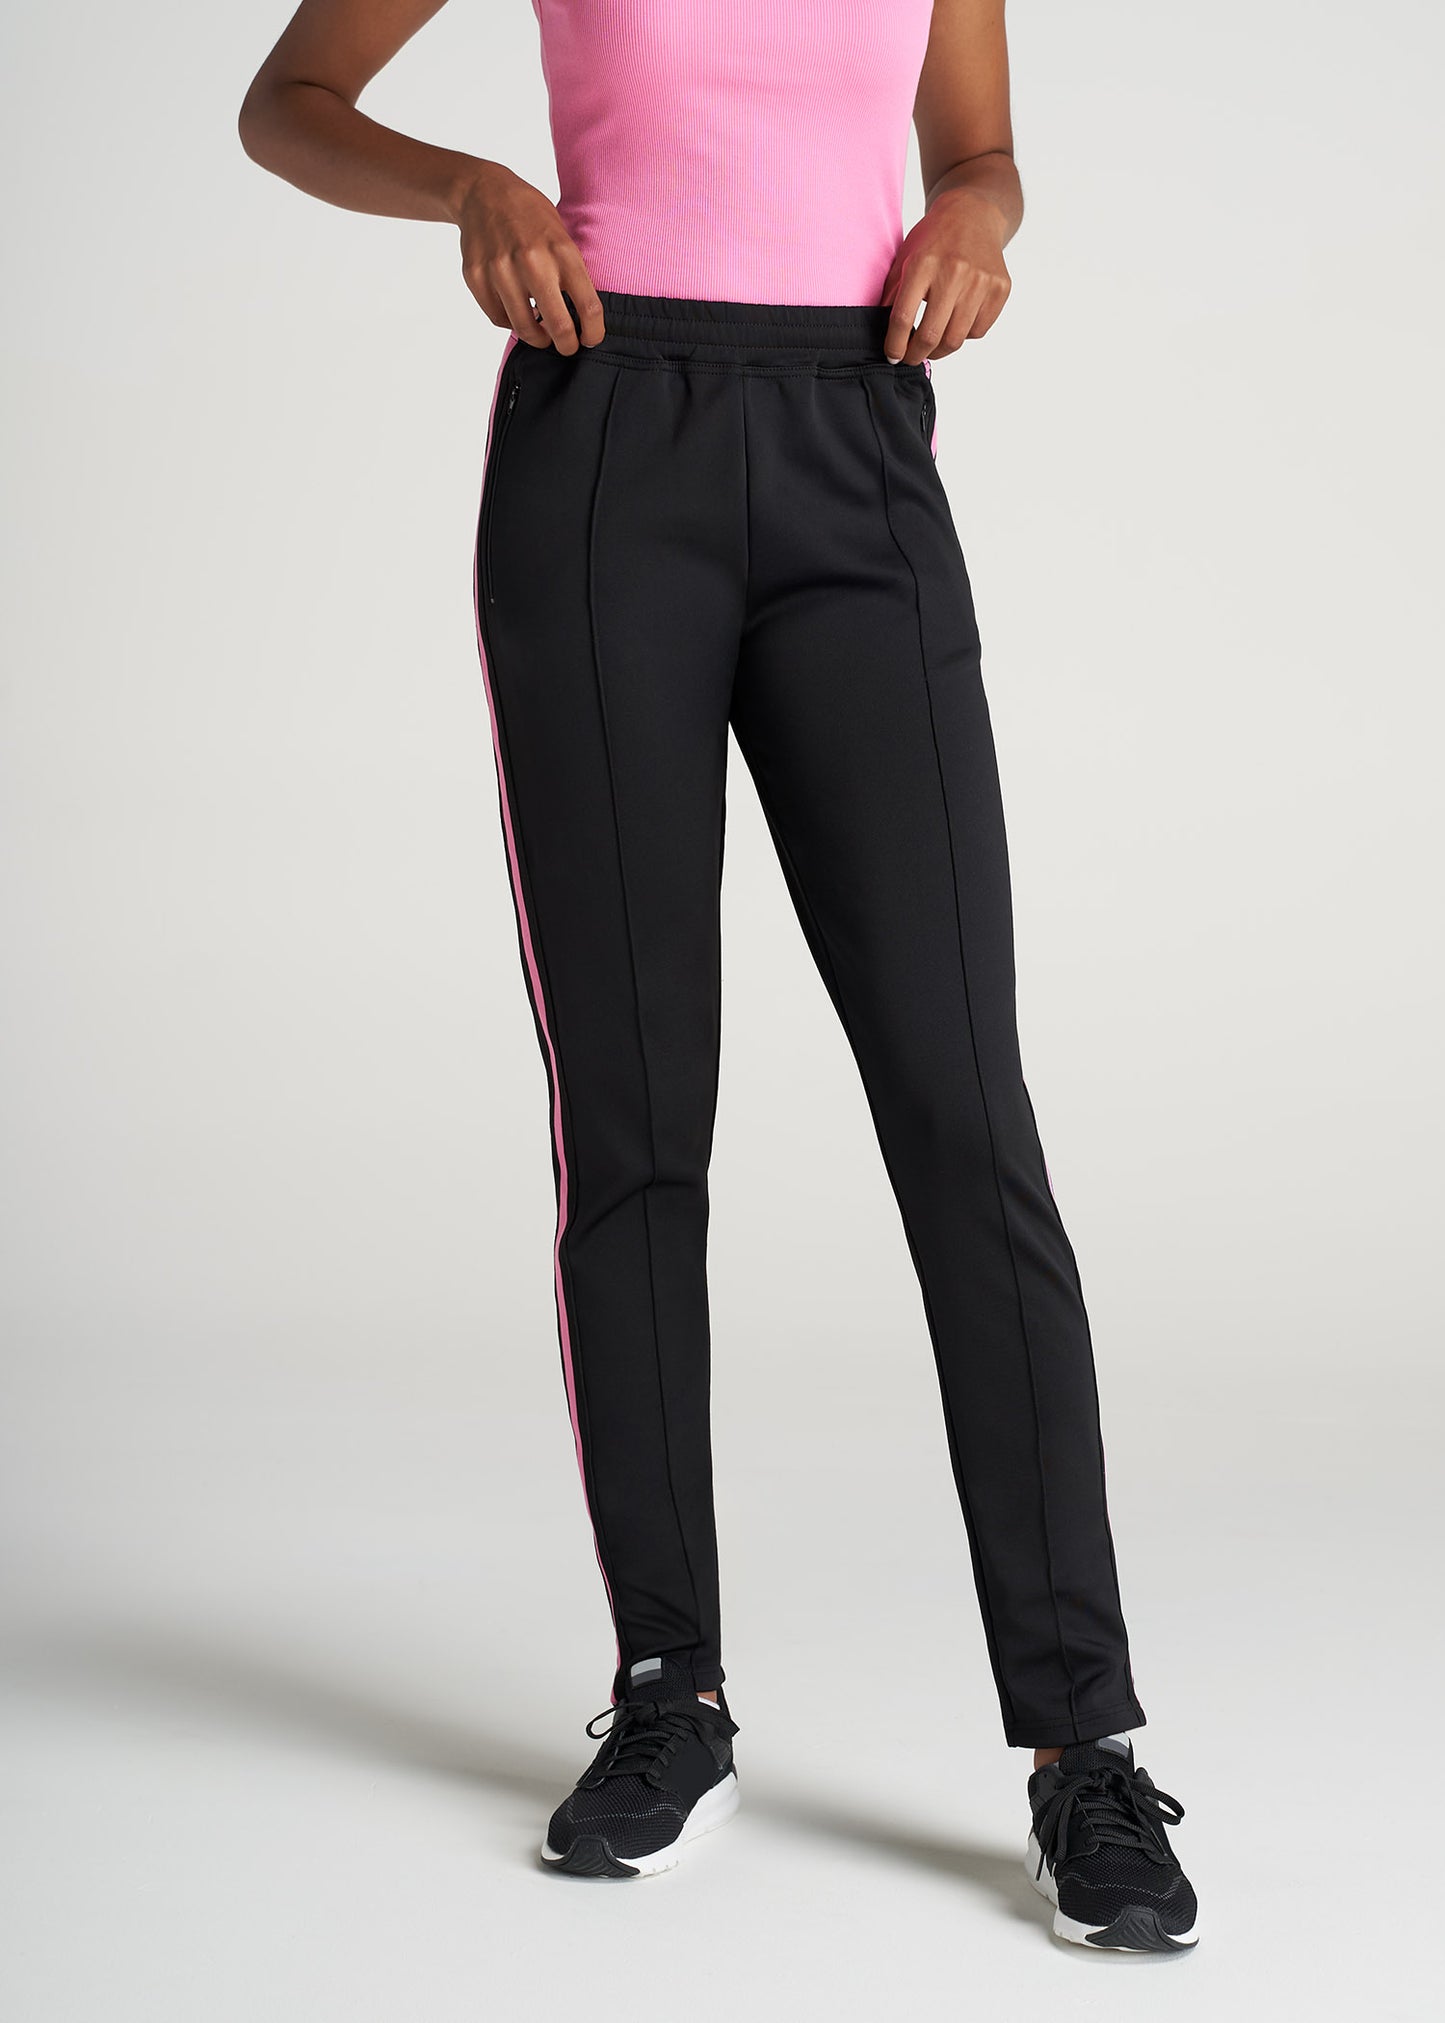 American-Tall-Women-Athletic-StripePant-Black_Pink-front